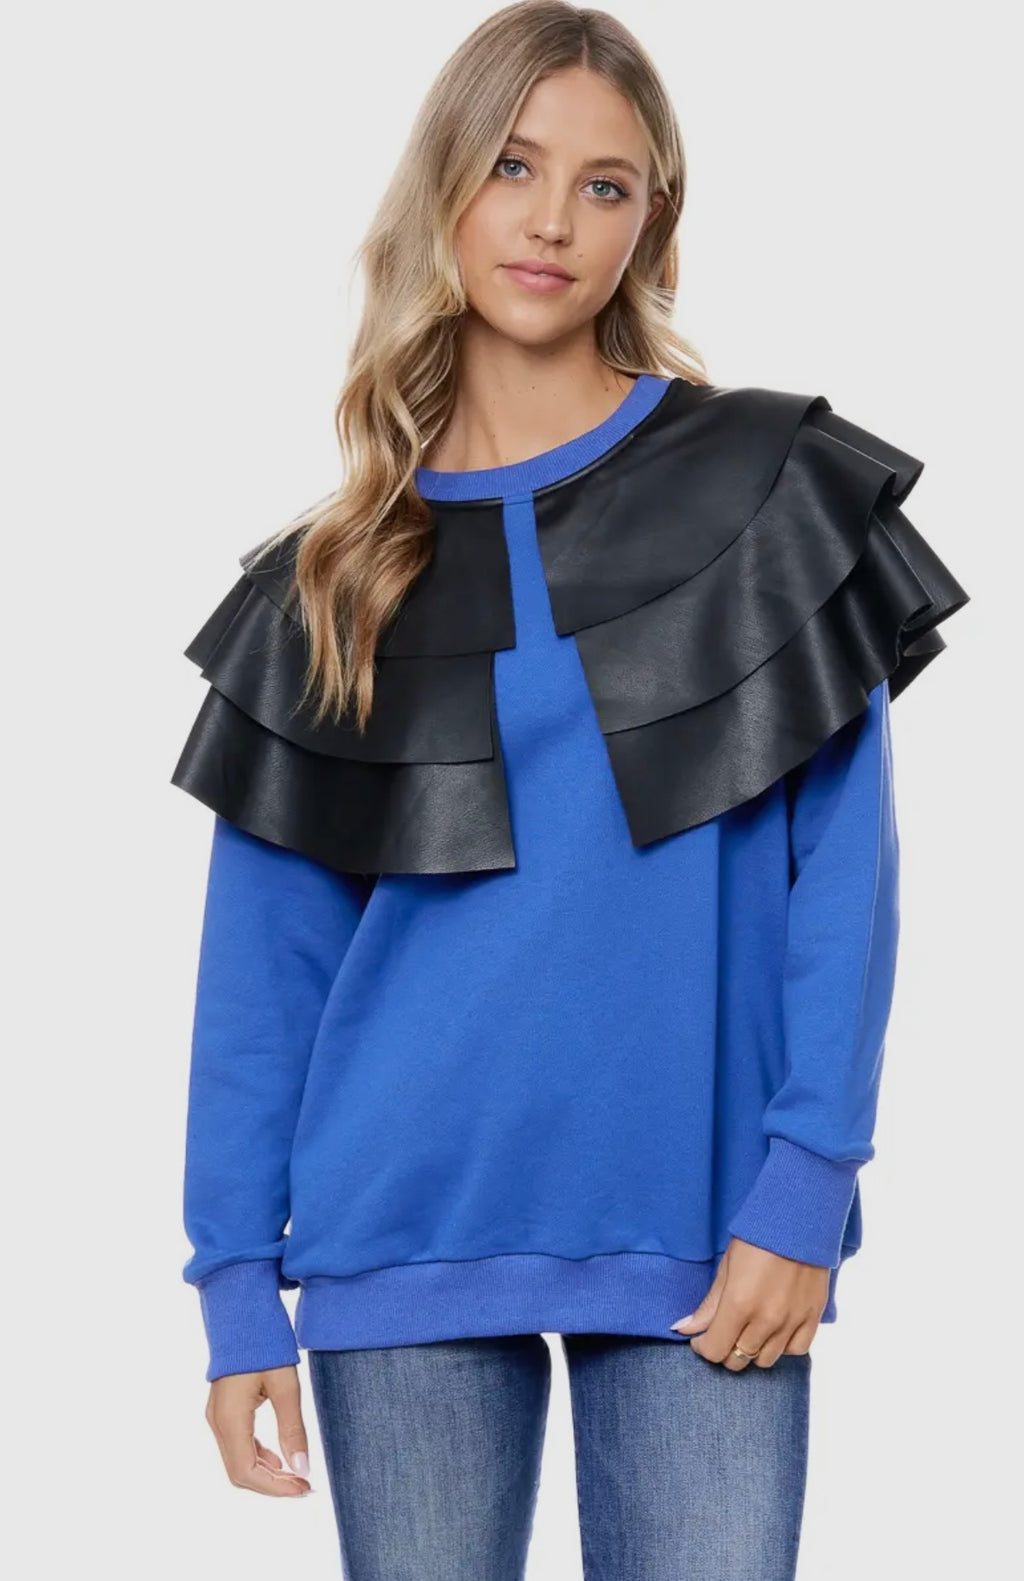 Sassy Faux Leather Ruffle Shoulder Top